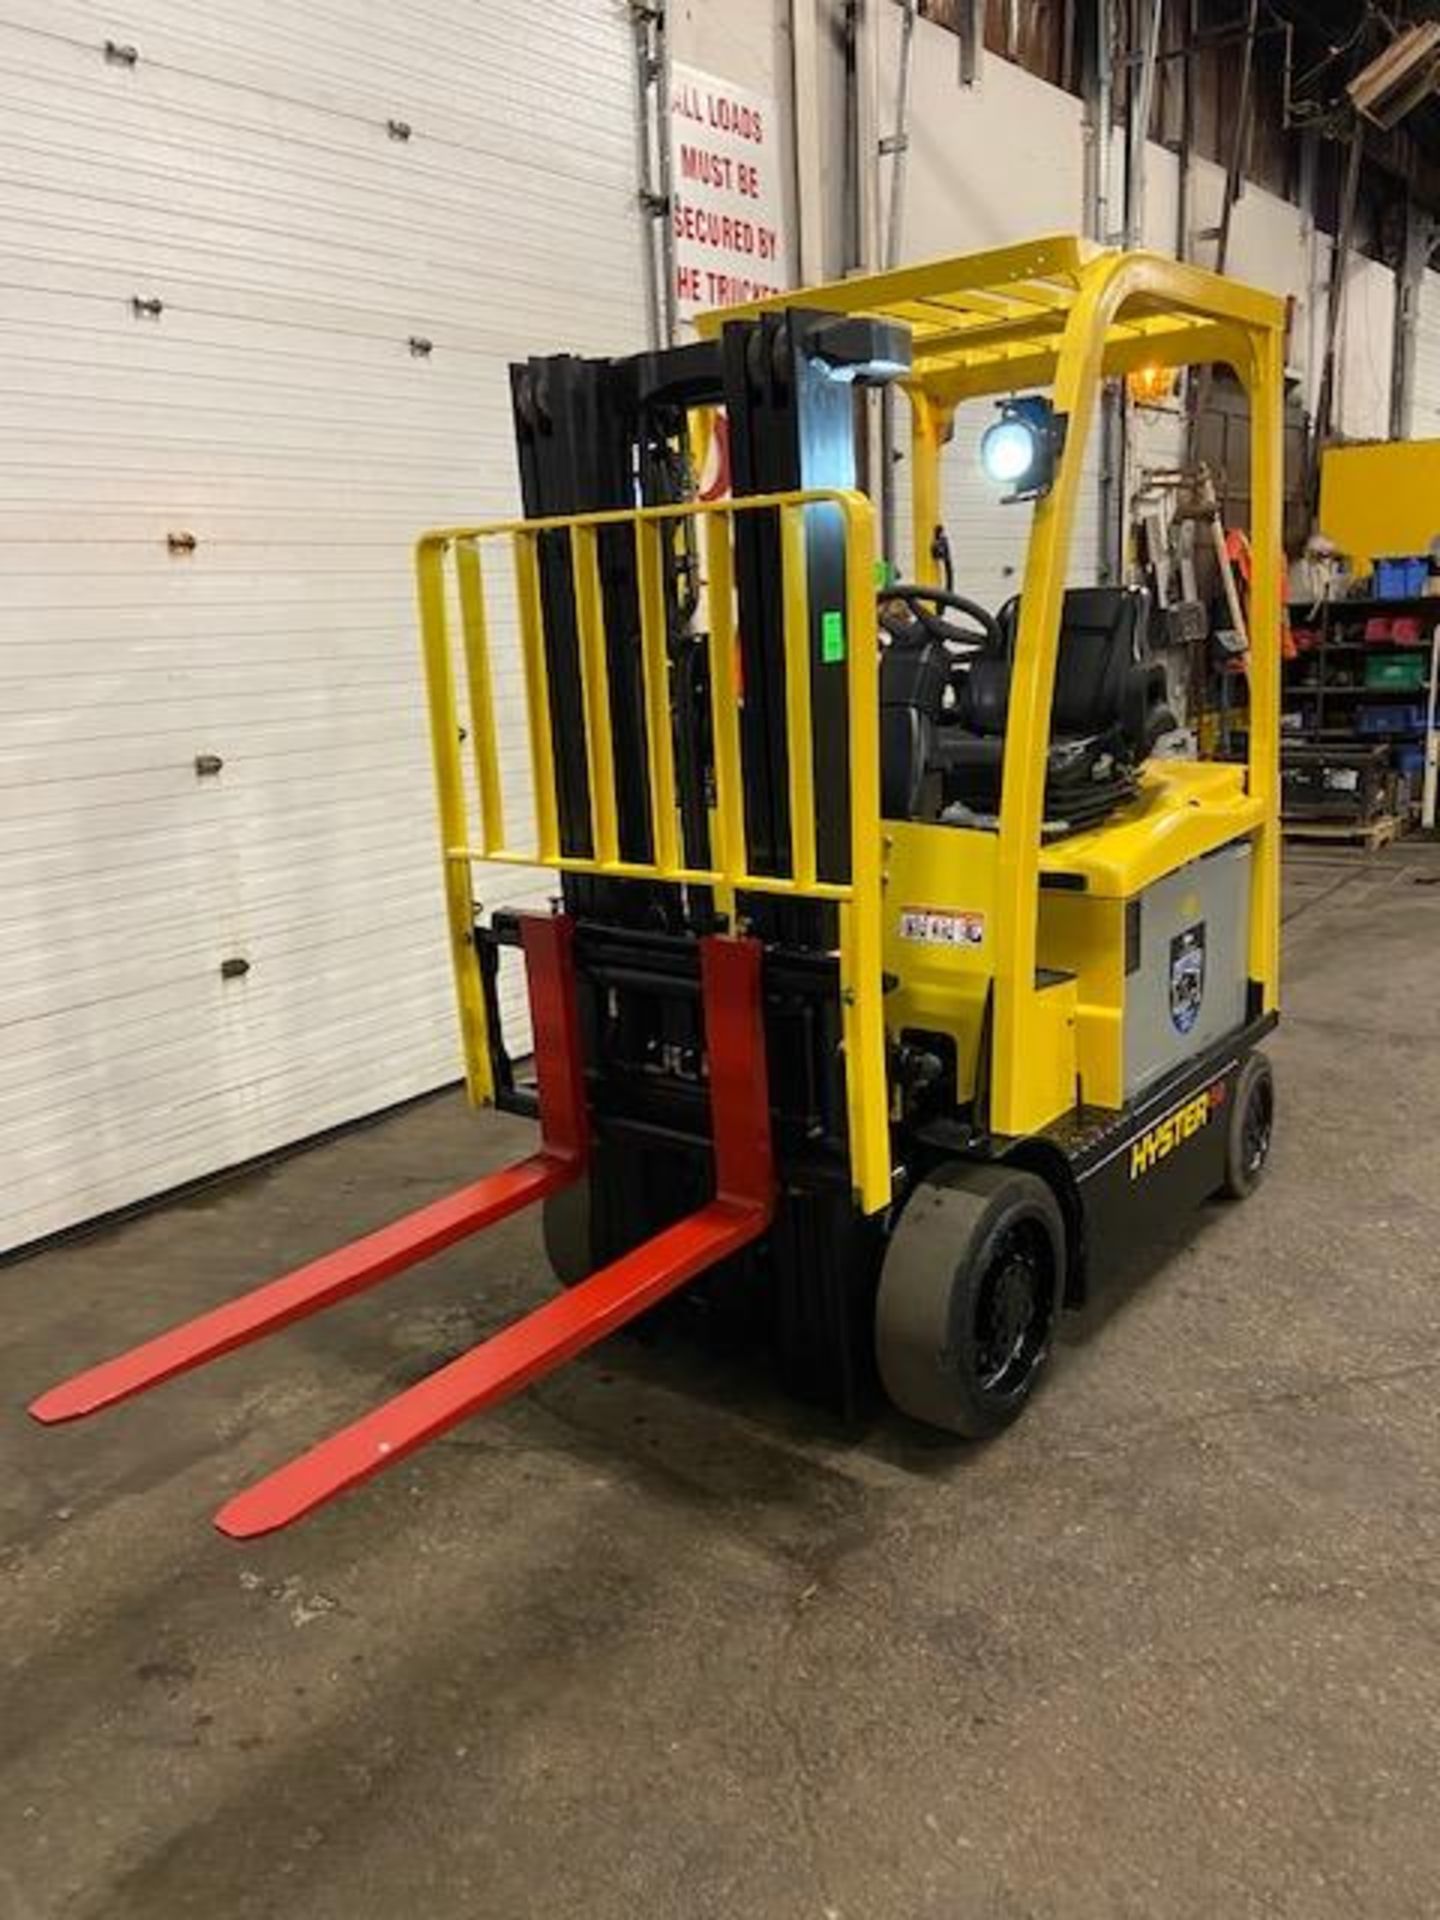 FREE CUSTOMS - 2012 Hyster 5000lbs Capacity Forklift Electric with 3-STAGE MAST sideshift MINT - Image 2 of 3